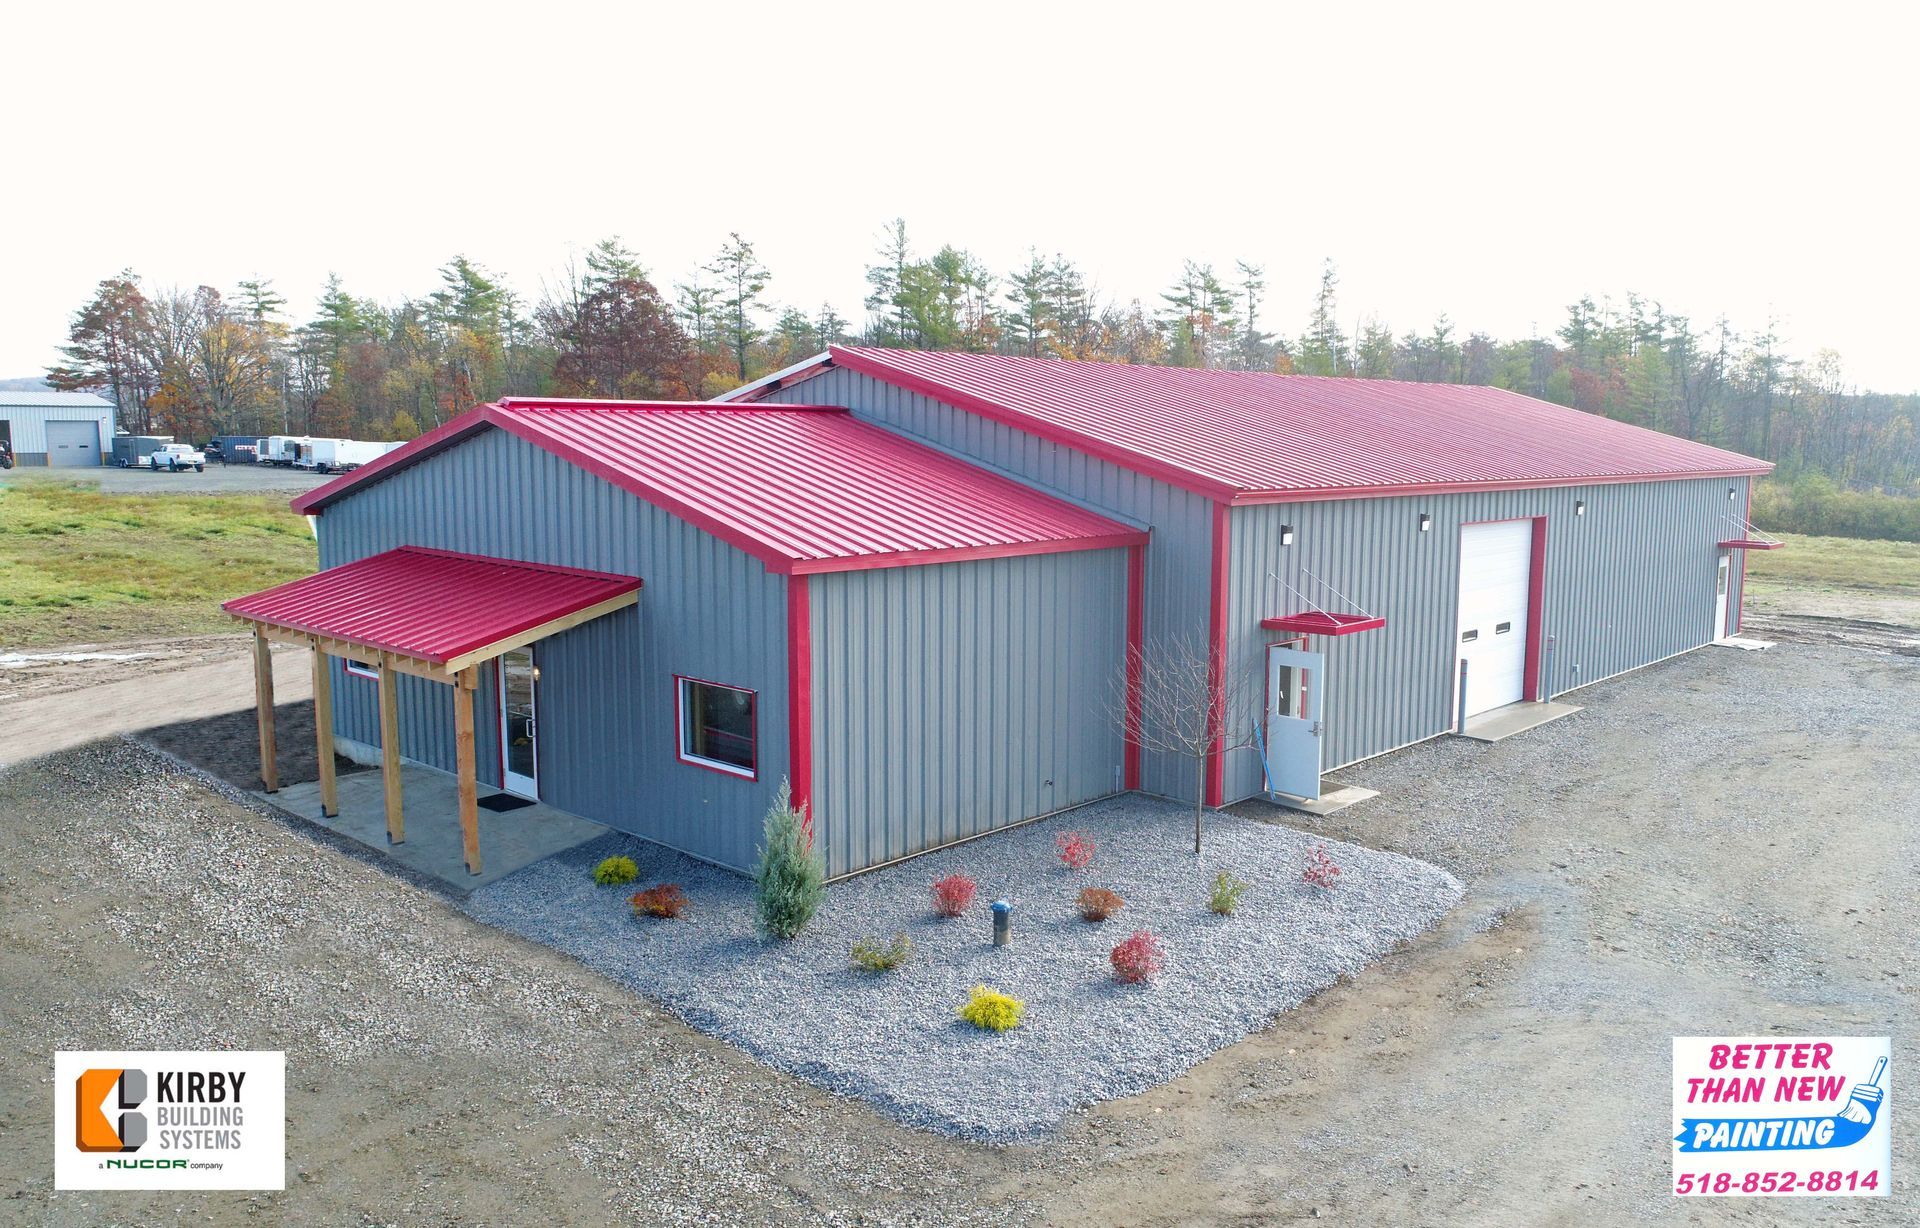 An aerial view of a large metal building with a red roof.